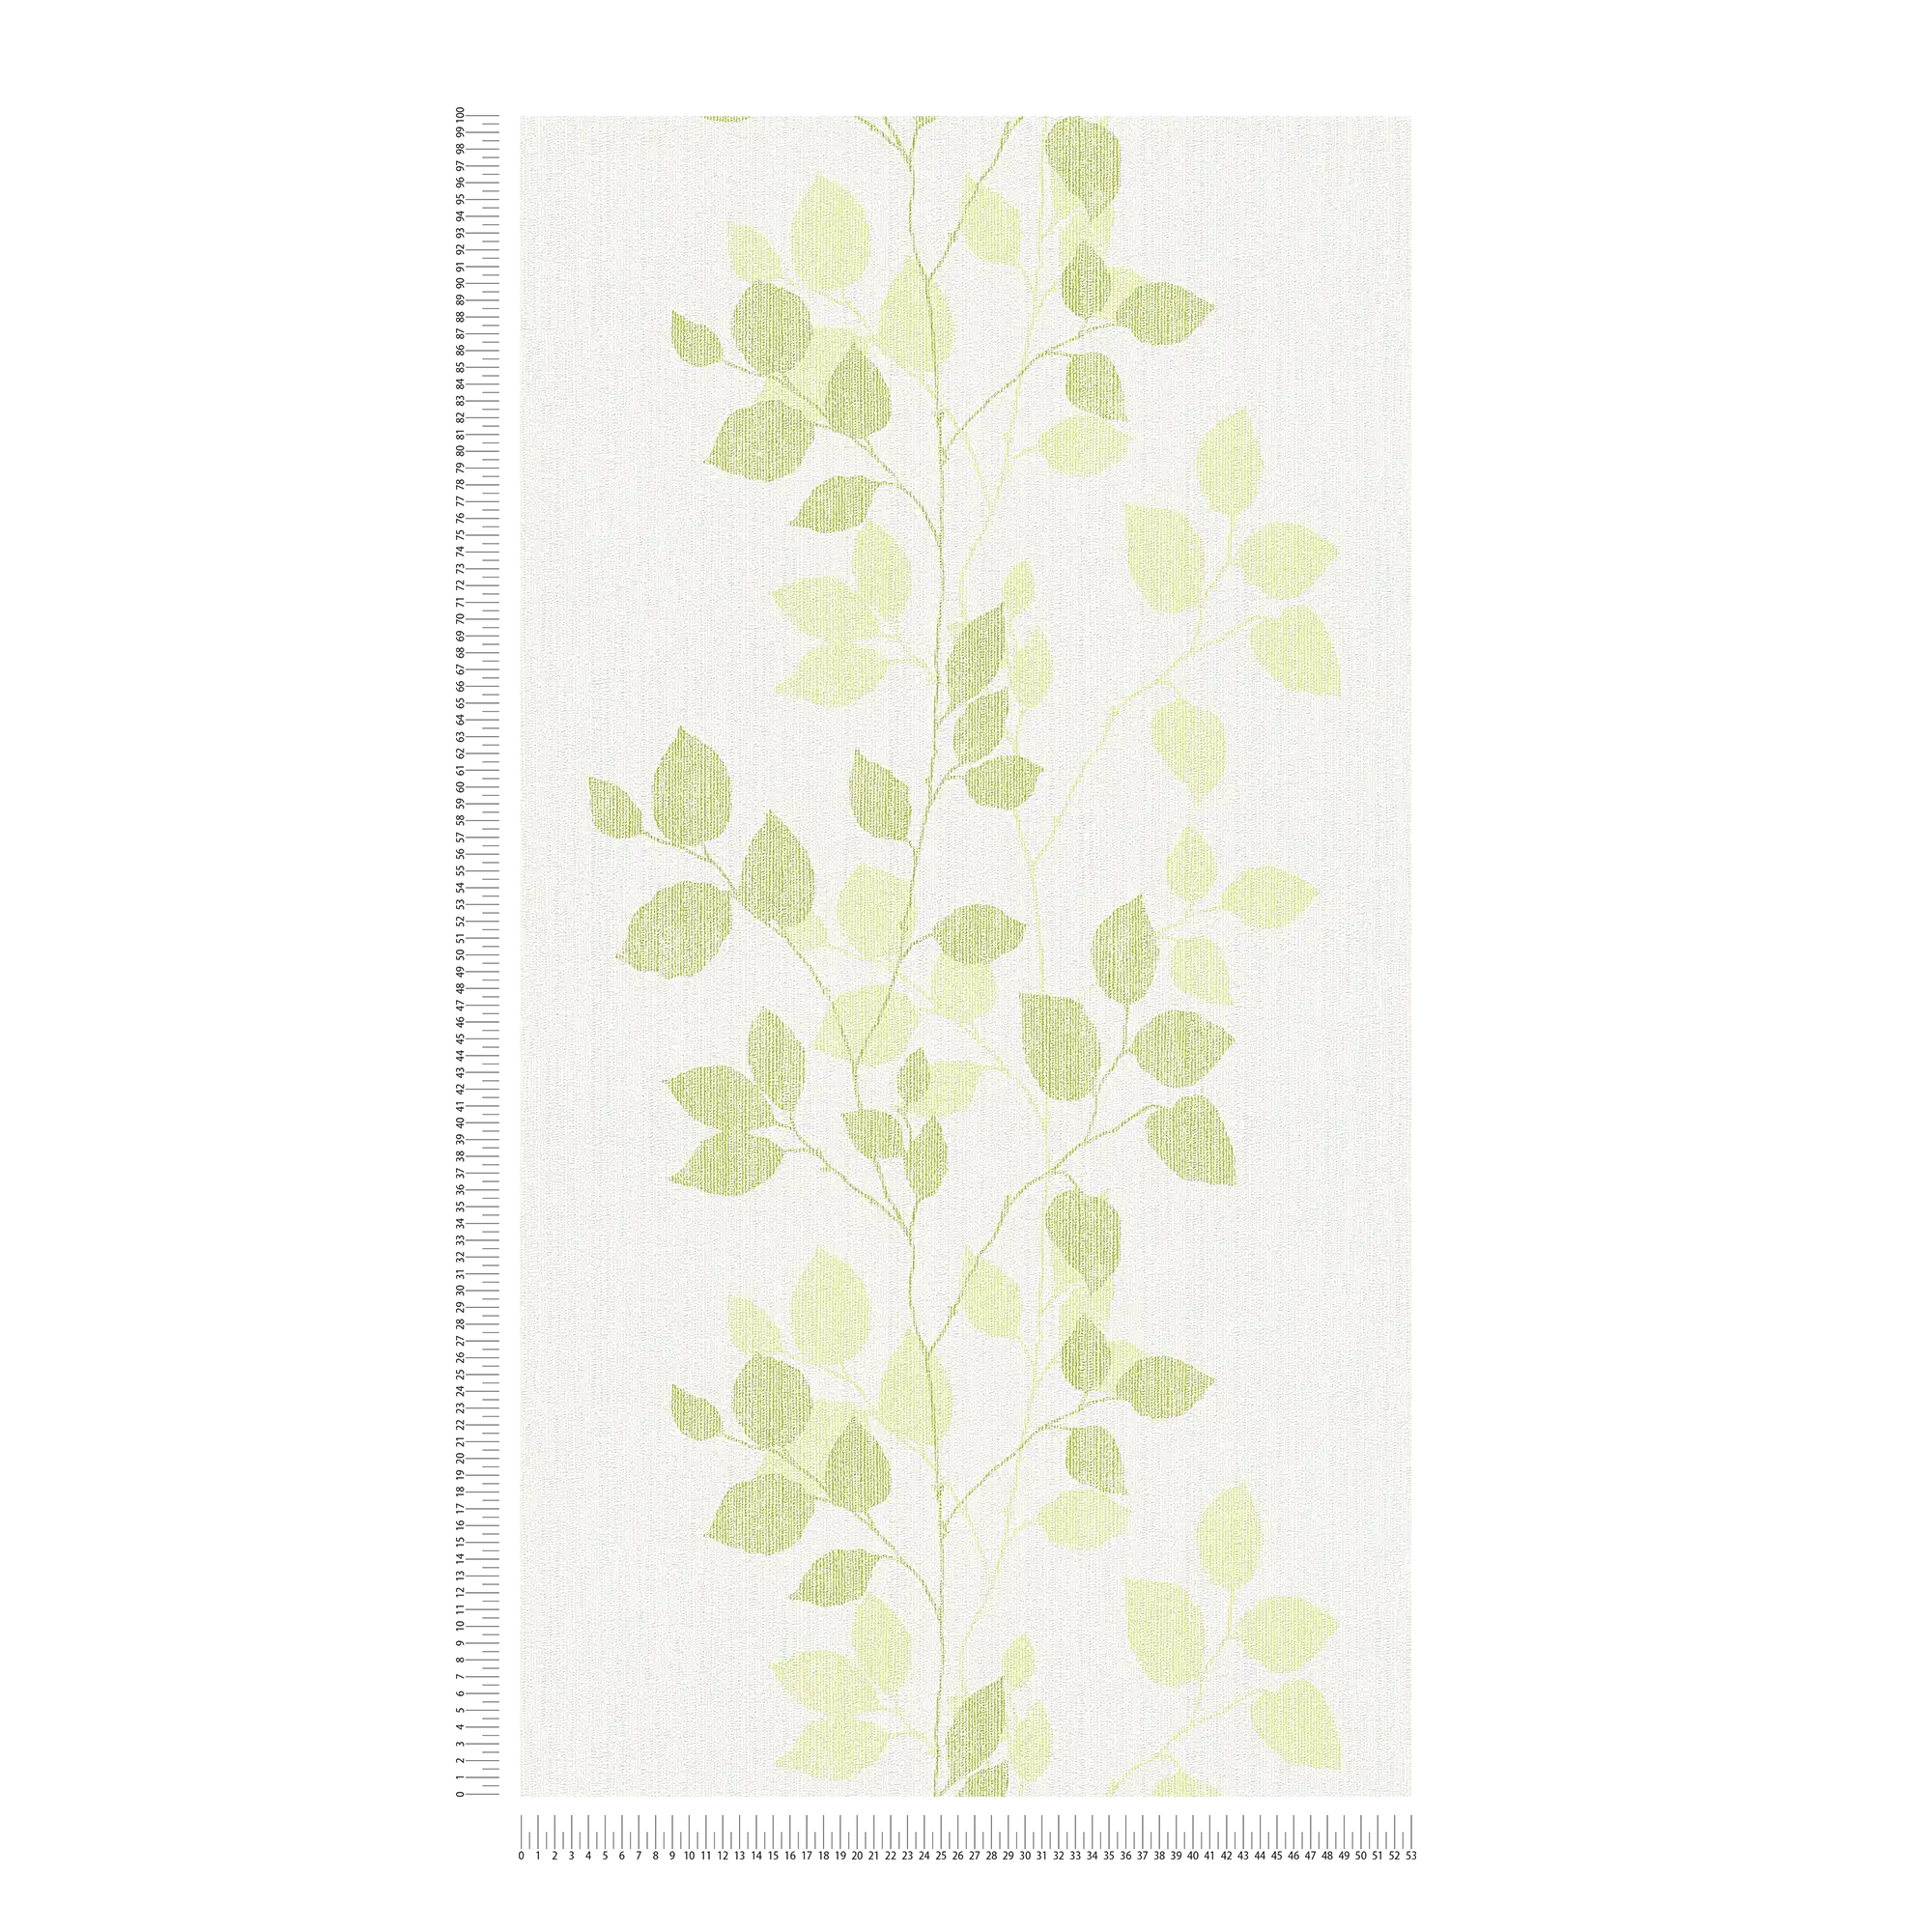             Pattern wallpaper leaves in spring colours - green, white
        